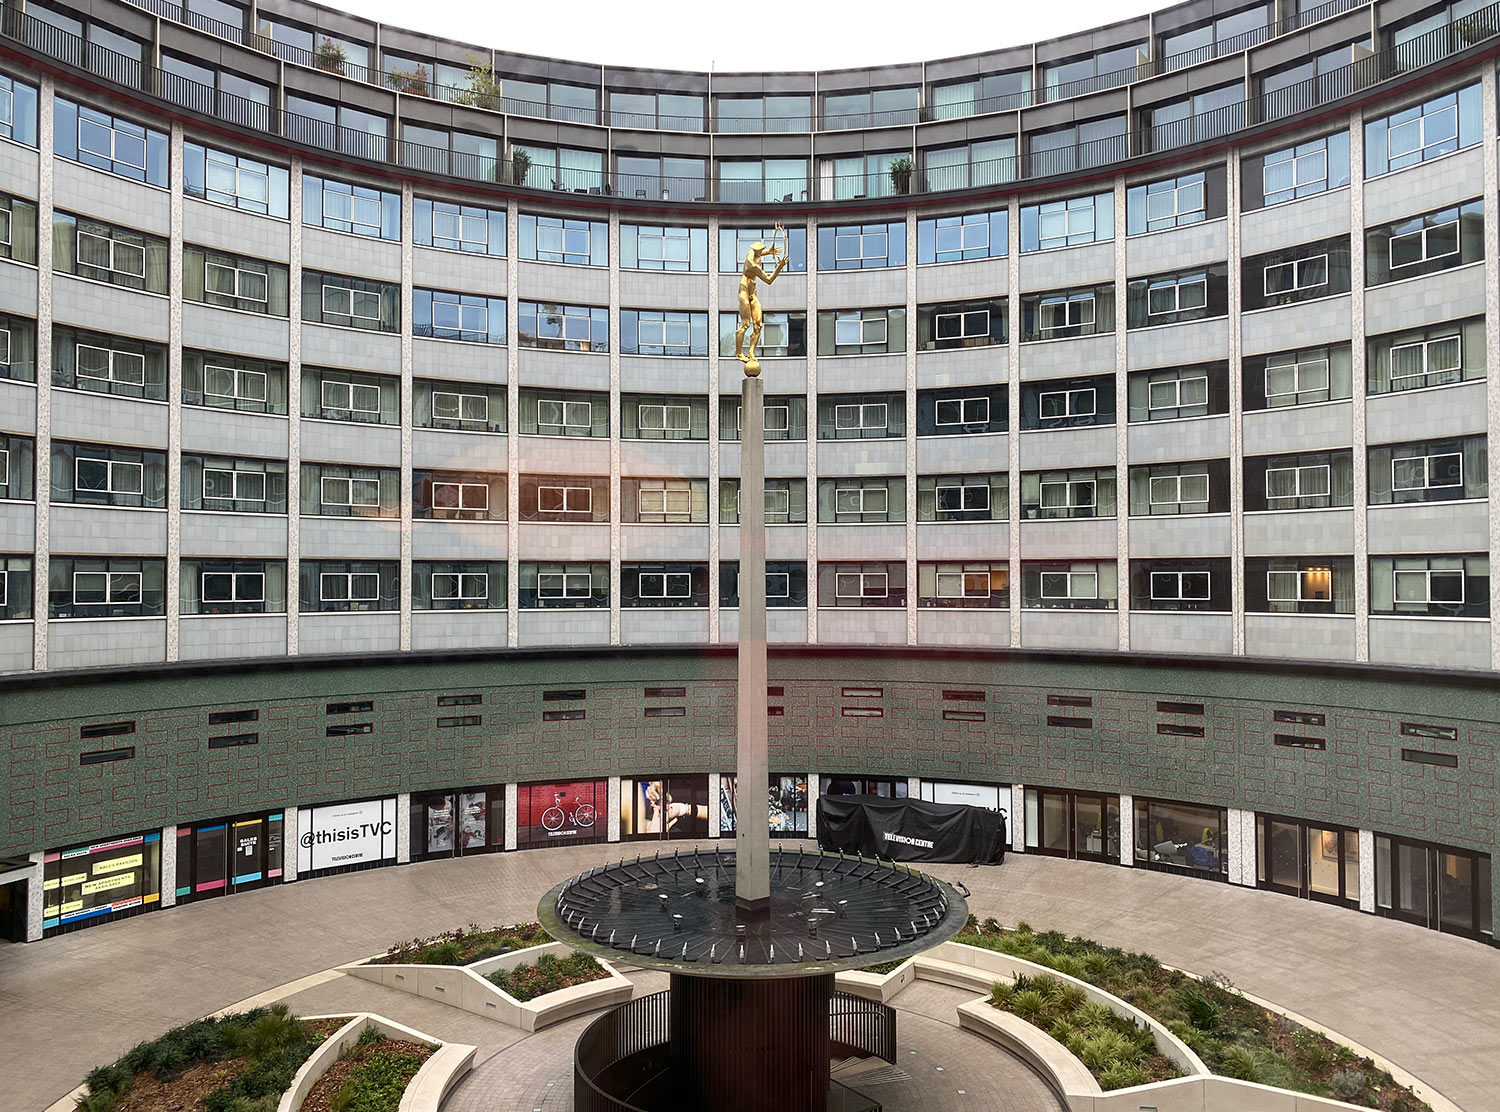 White City House Occupying part of the former BBC Television Centre building, many of the rooms are facing the centre of the Helios, an impressive sight 